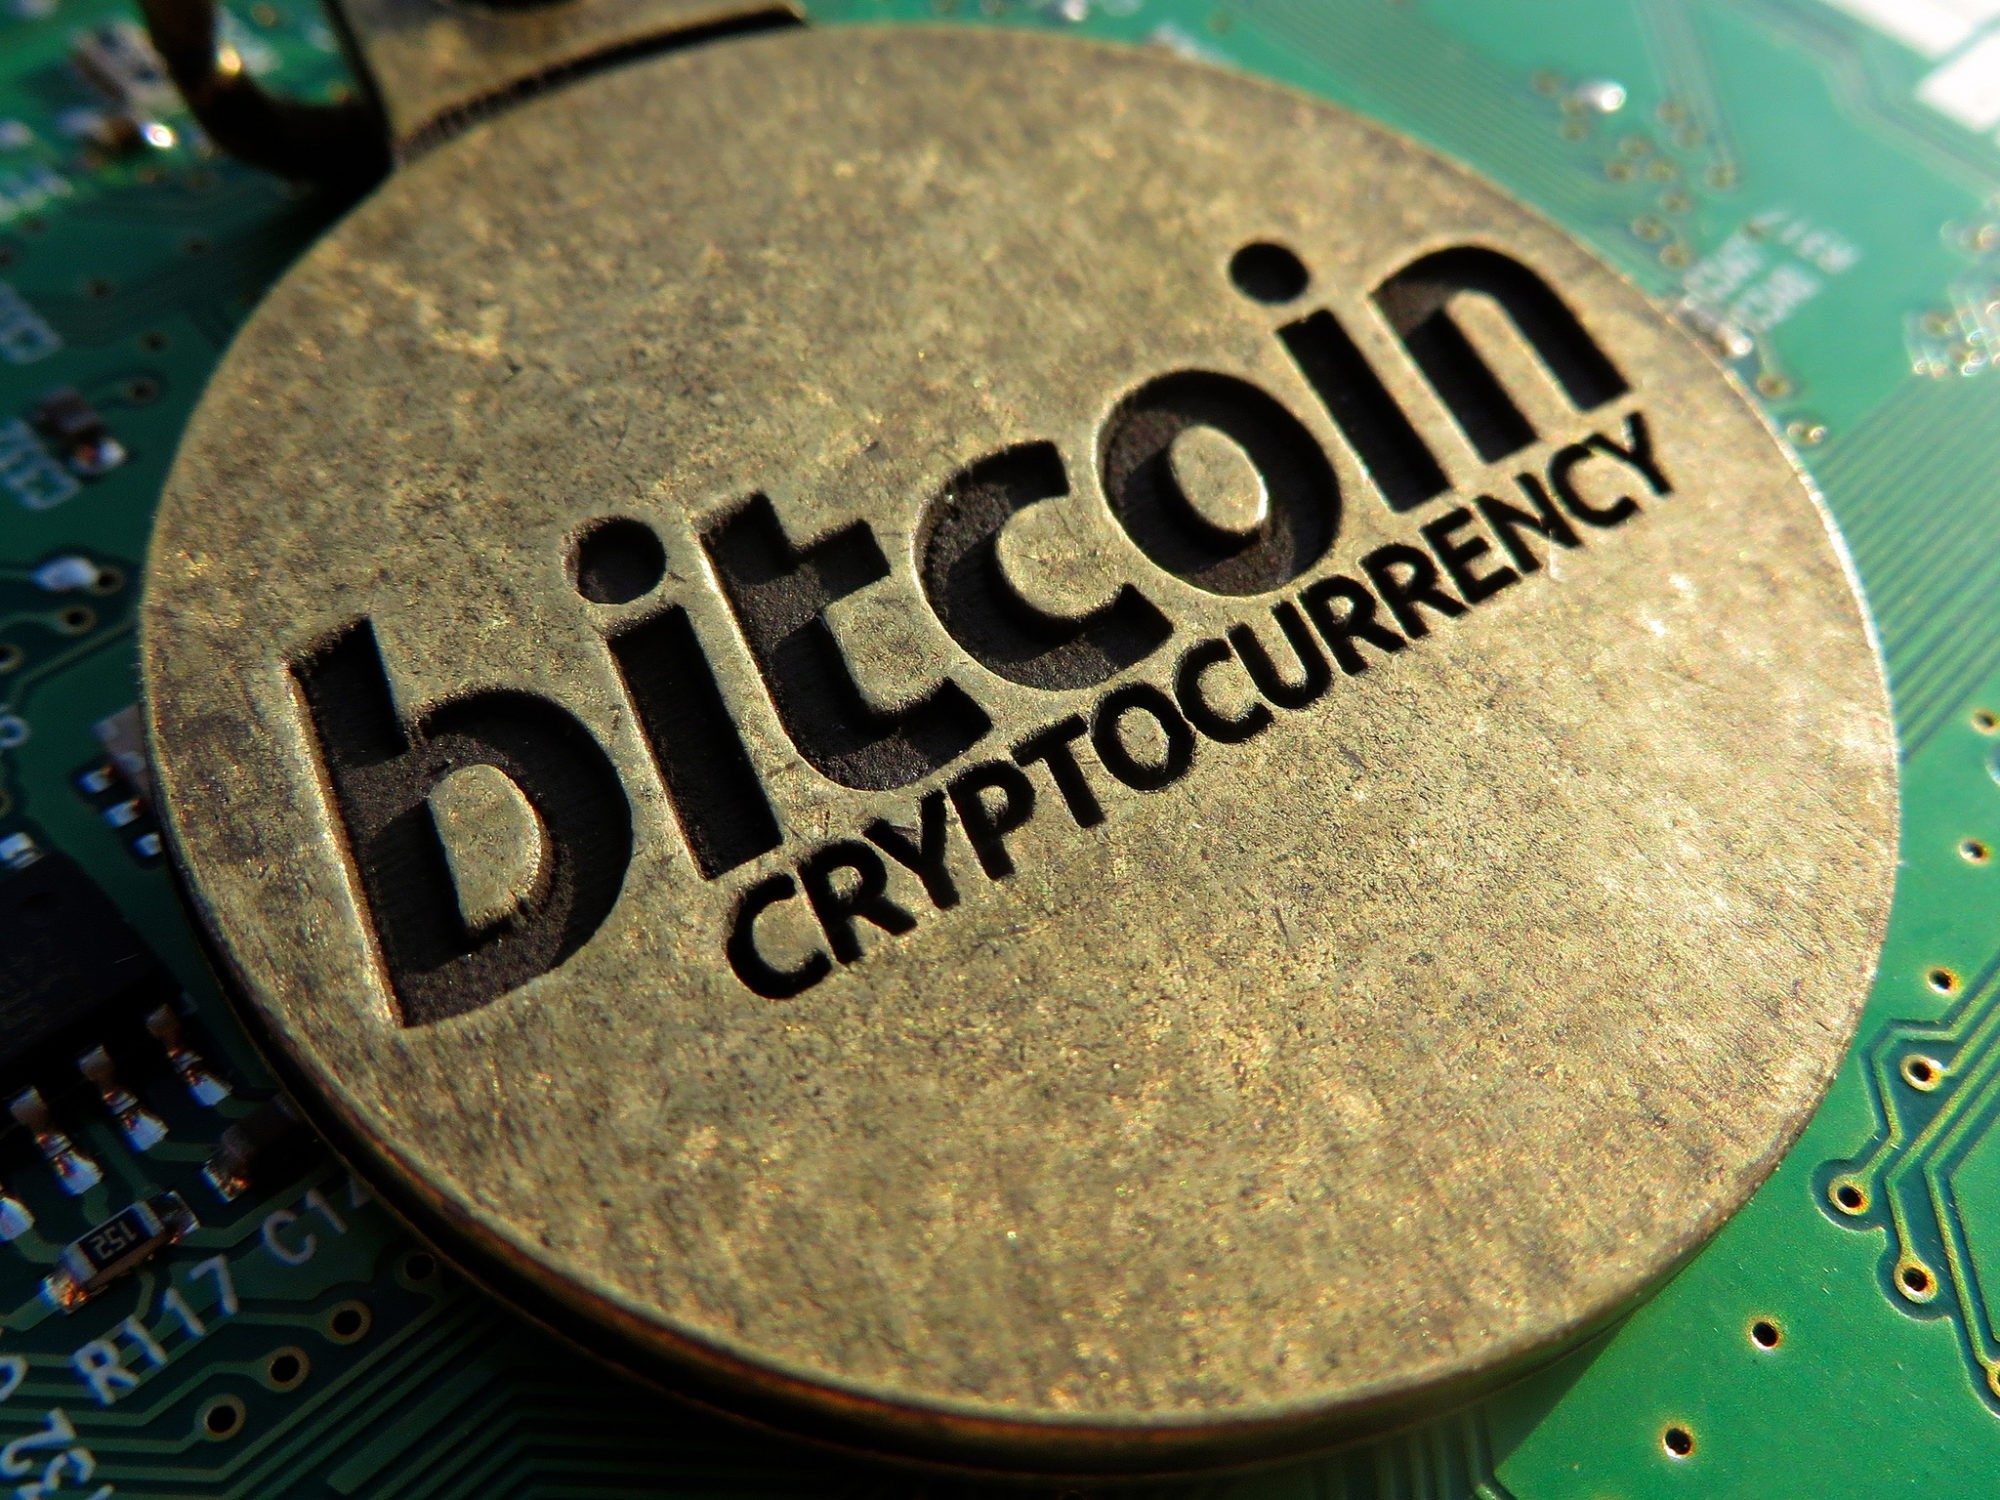 Cryptocurrency boom provides opportunities for cyber criminals